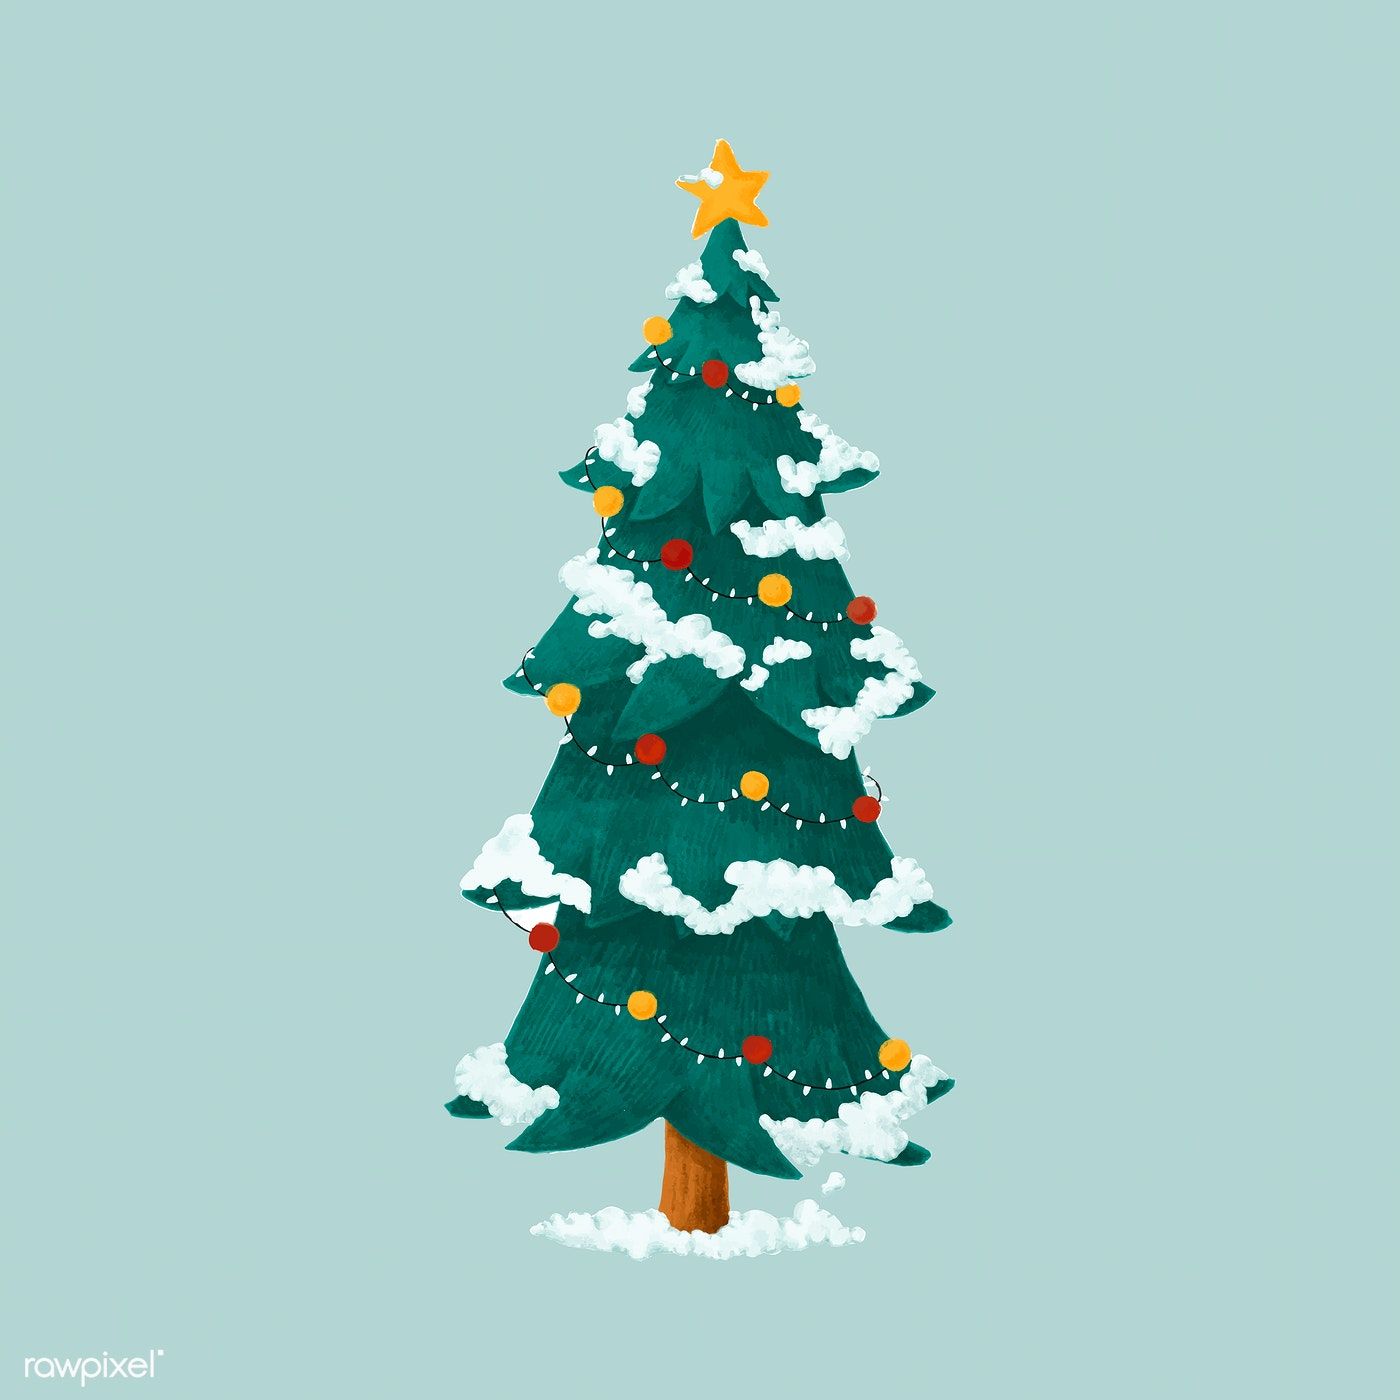 Download free vector of Hand drawn decorated Christmas tree illustration